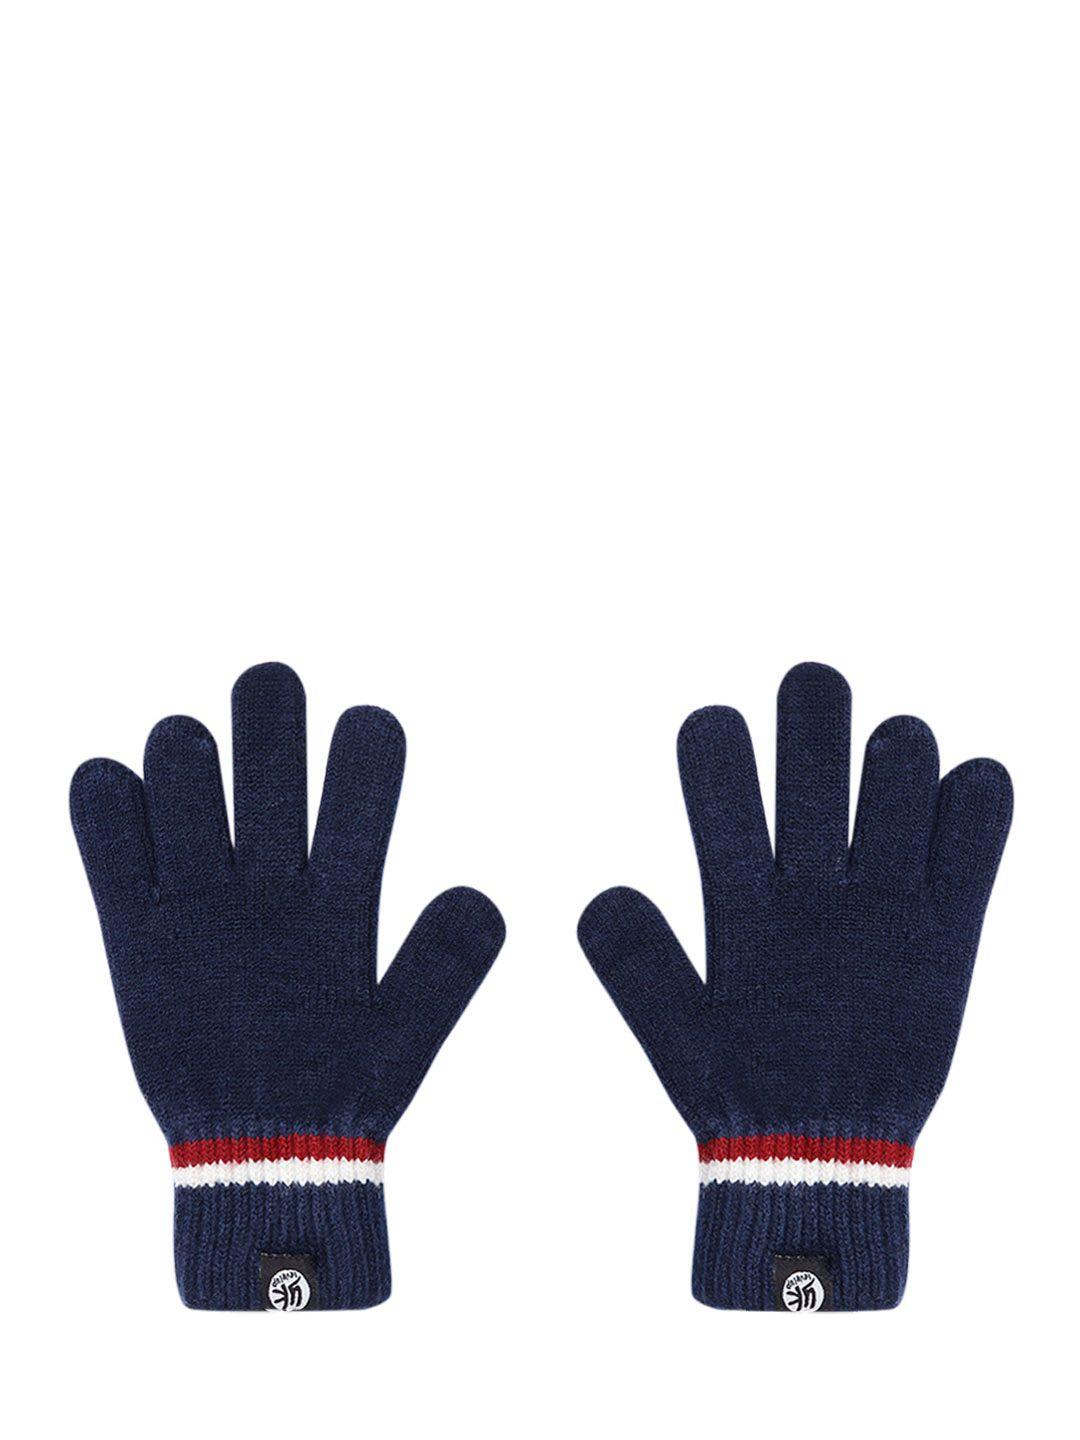 yk kids navy solid hand gloves with striped detail